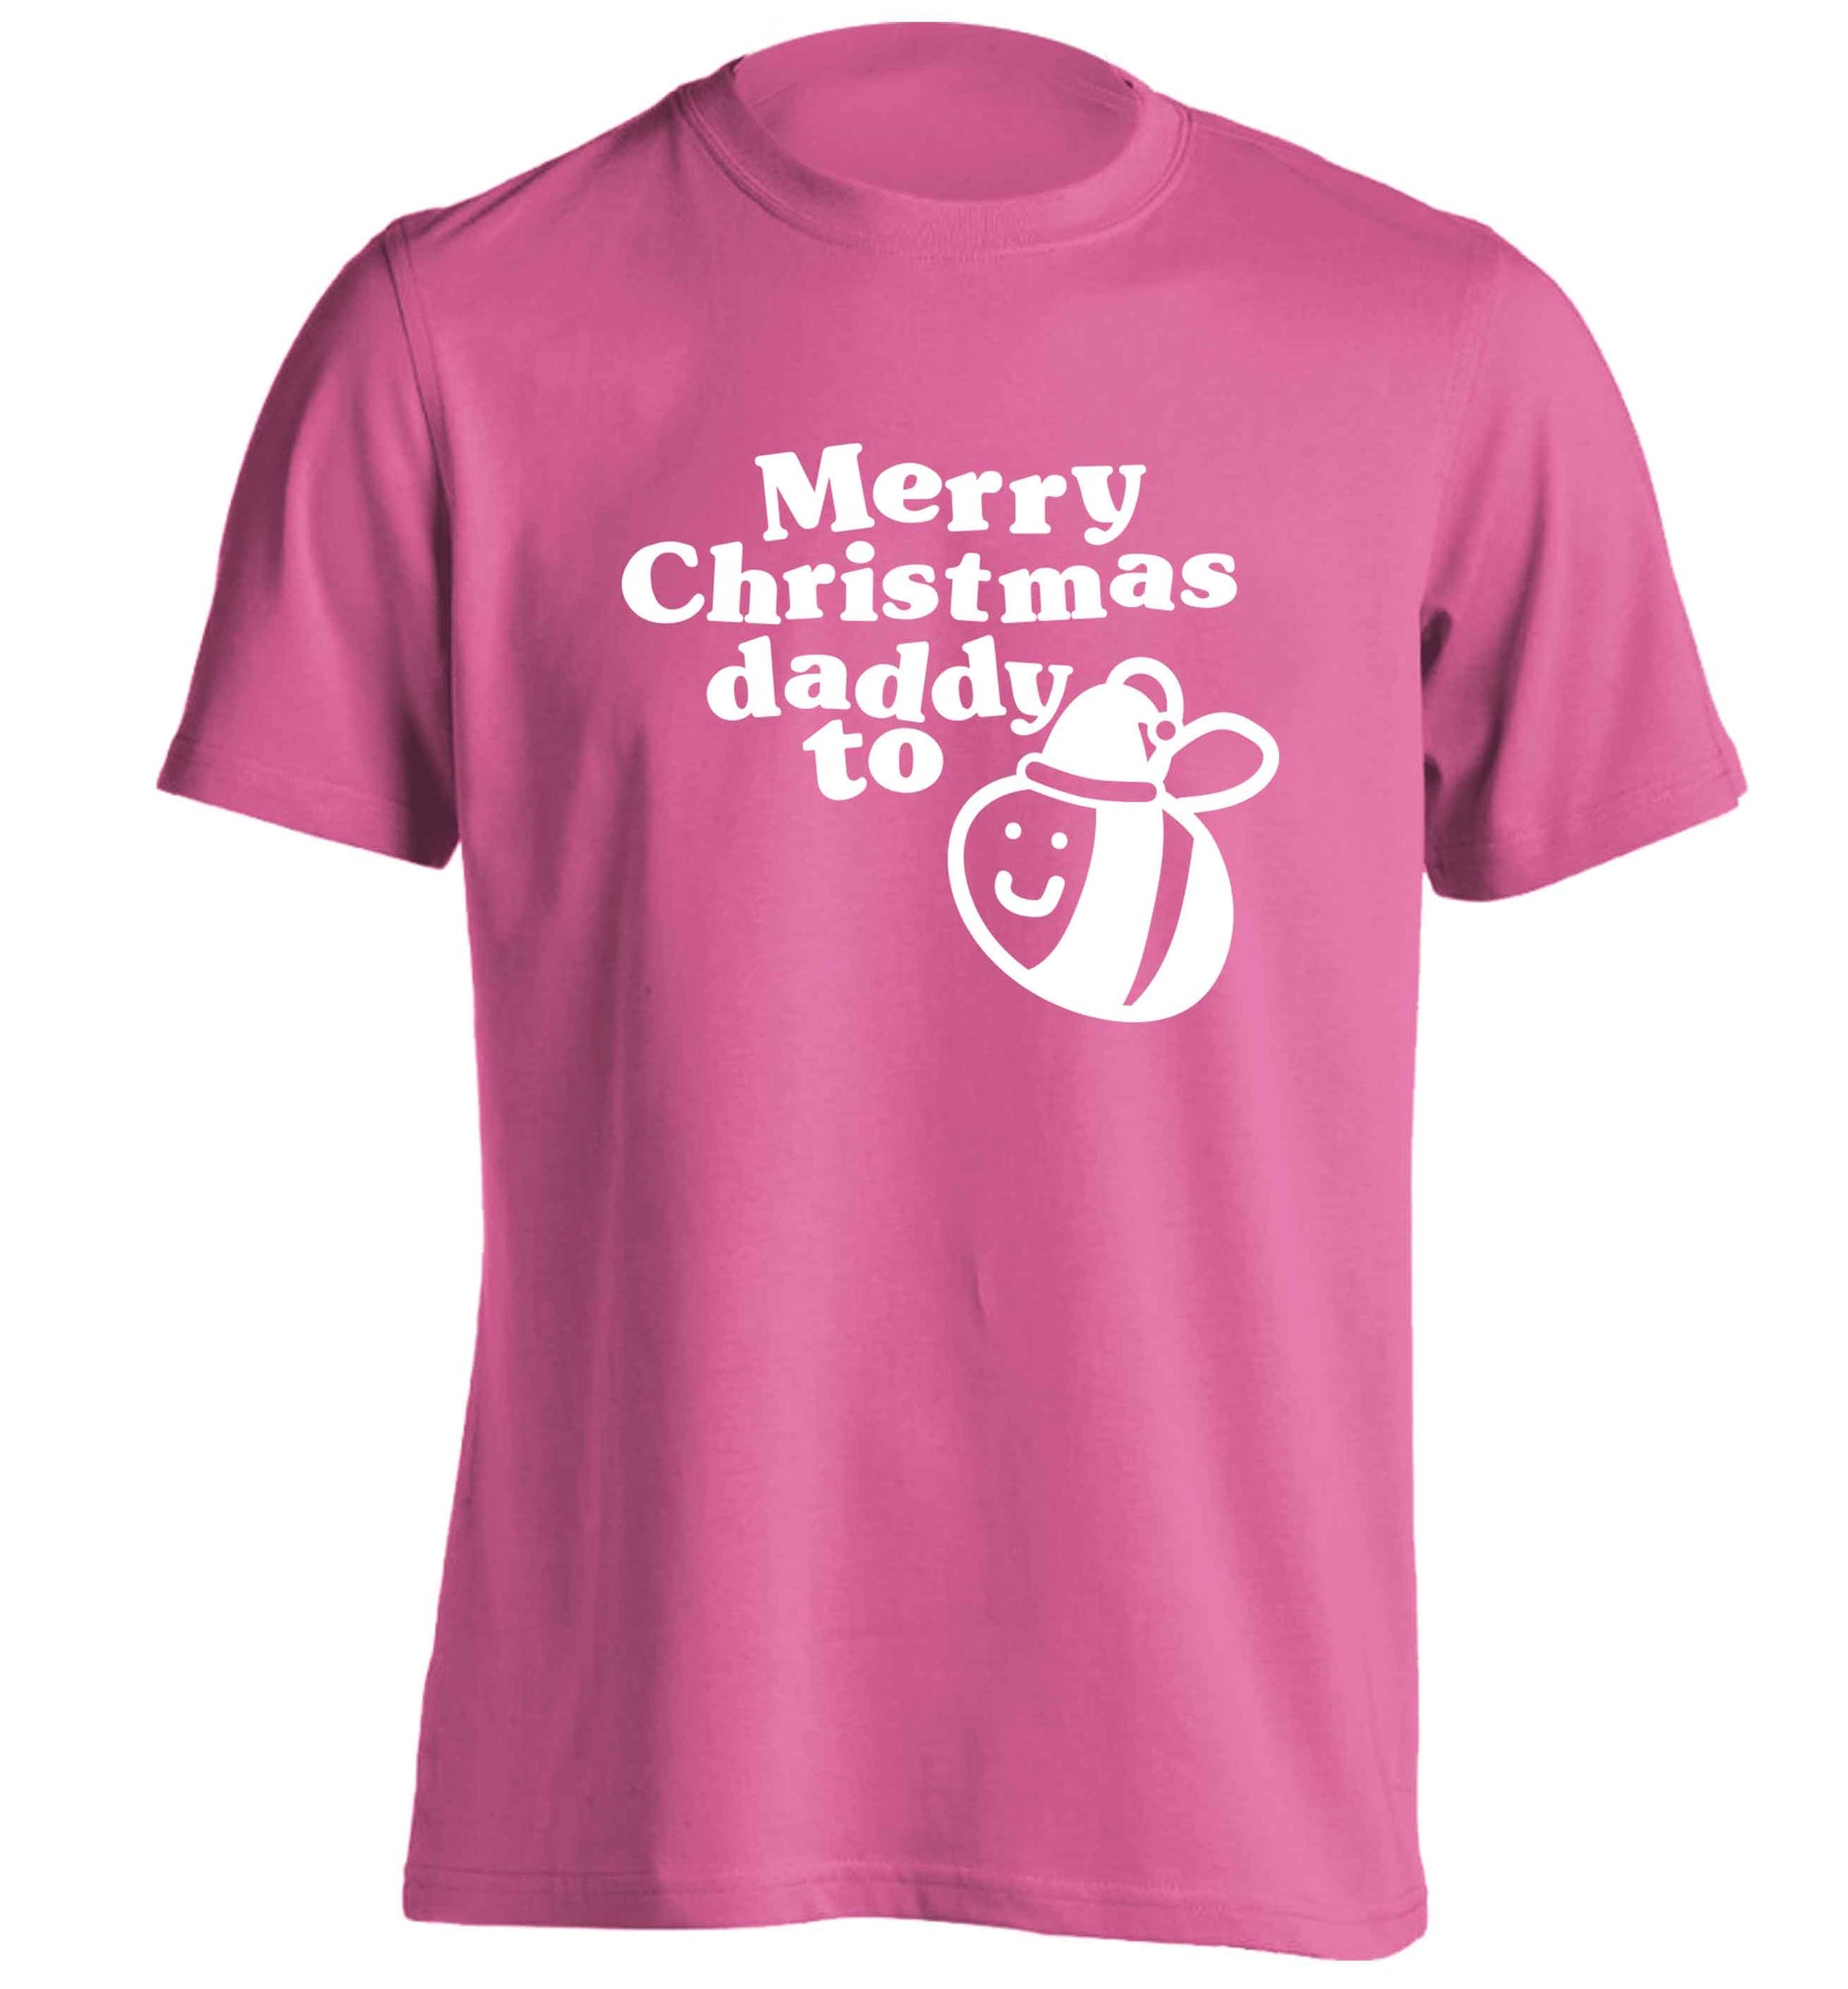 Merry Christmas daddy to be adults unisex pink Tshirt 2XL